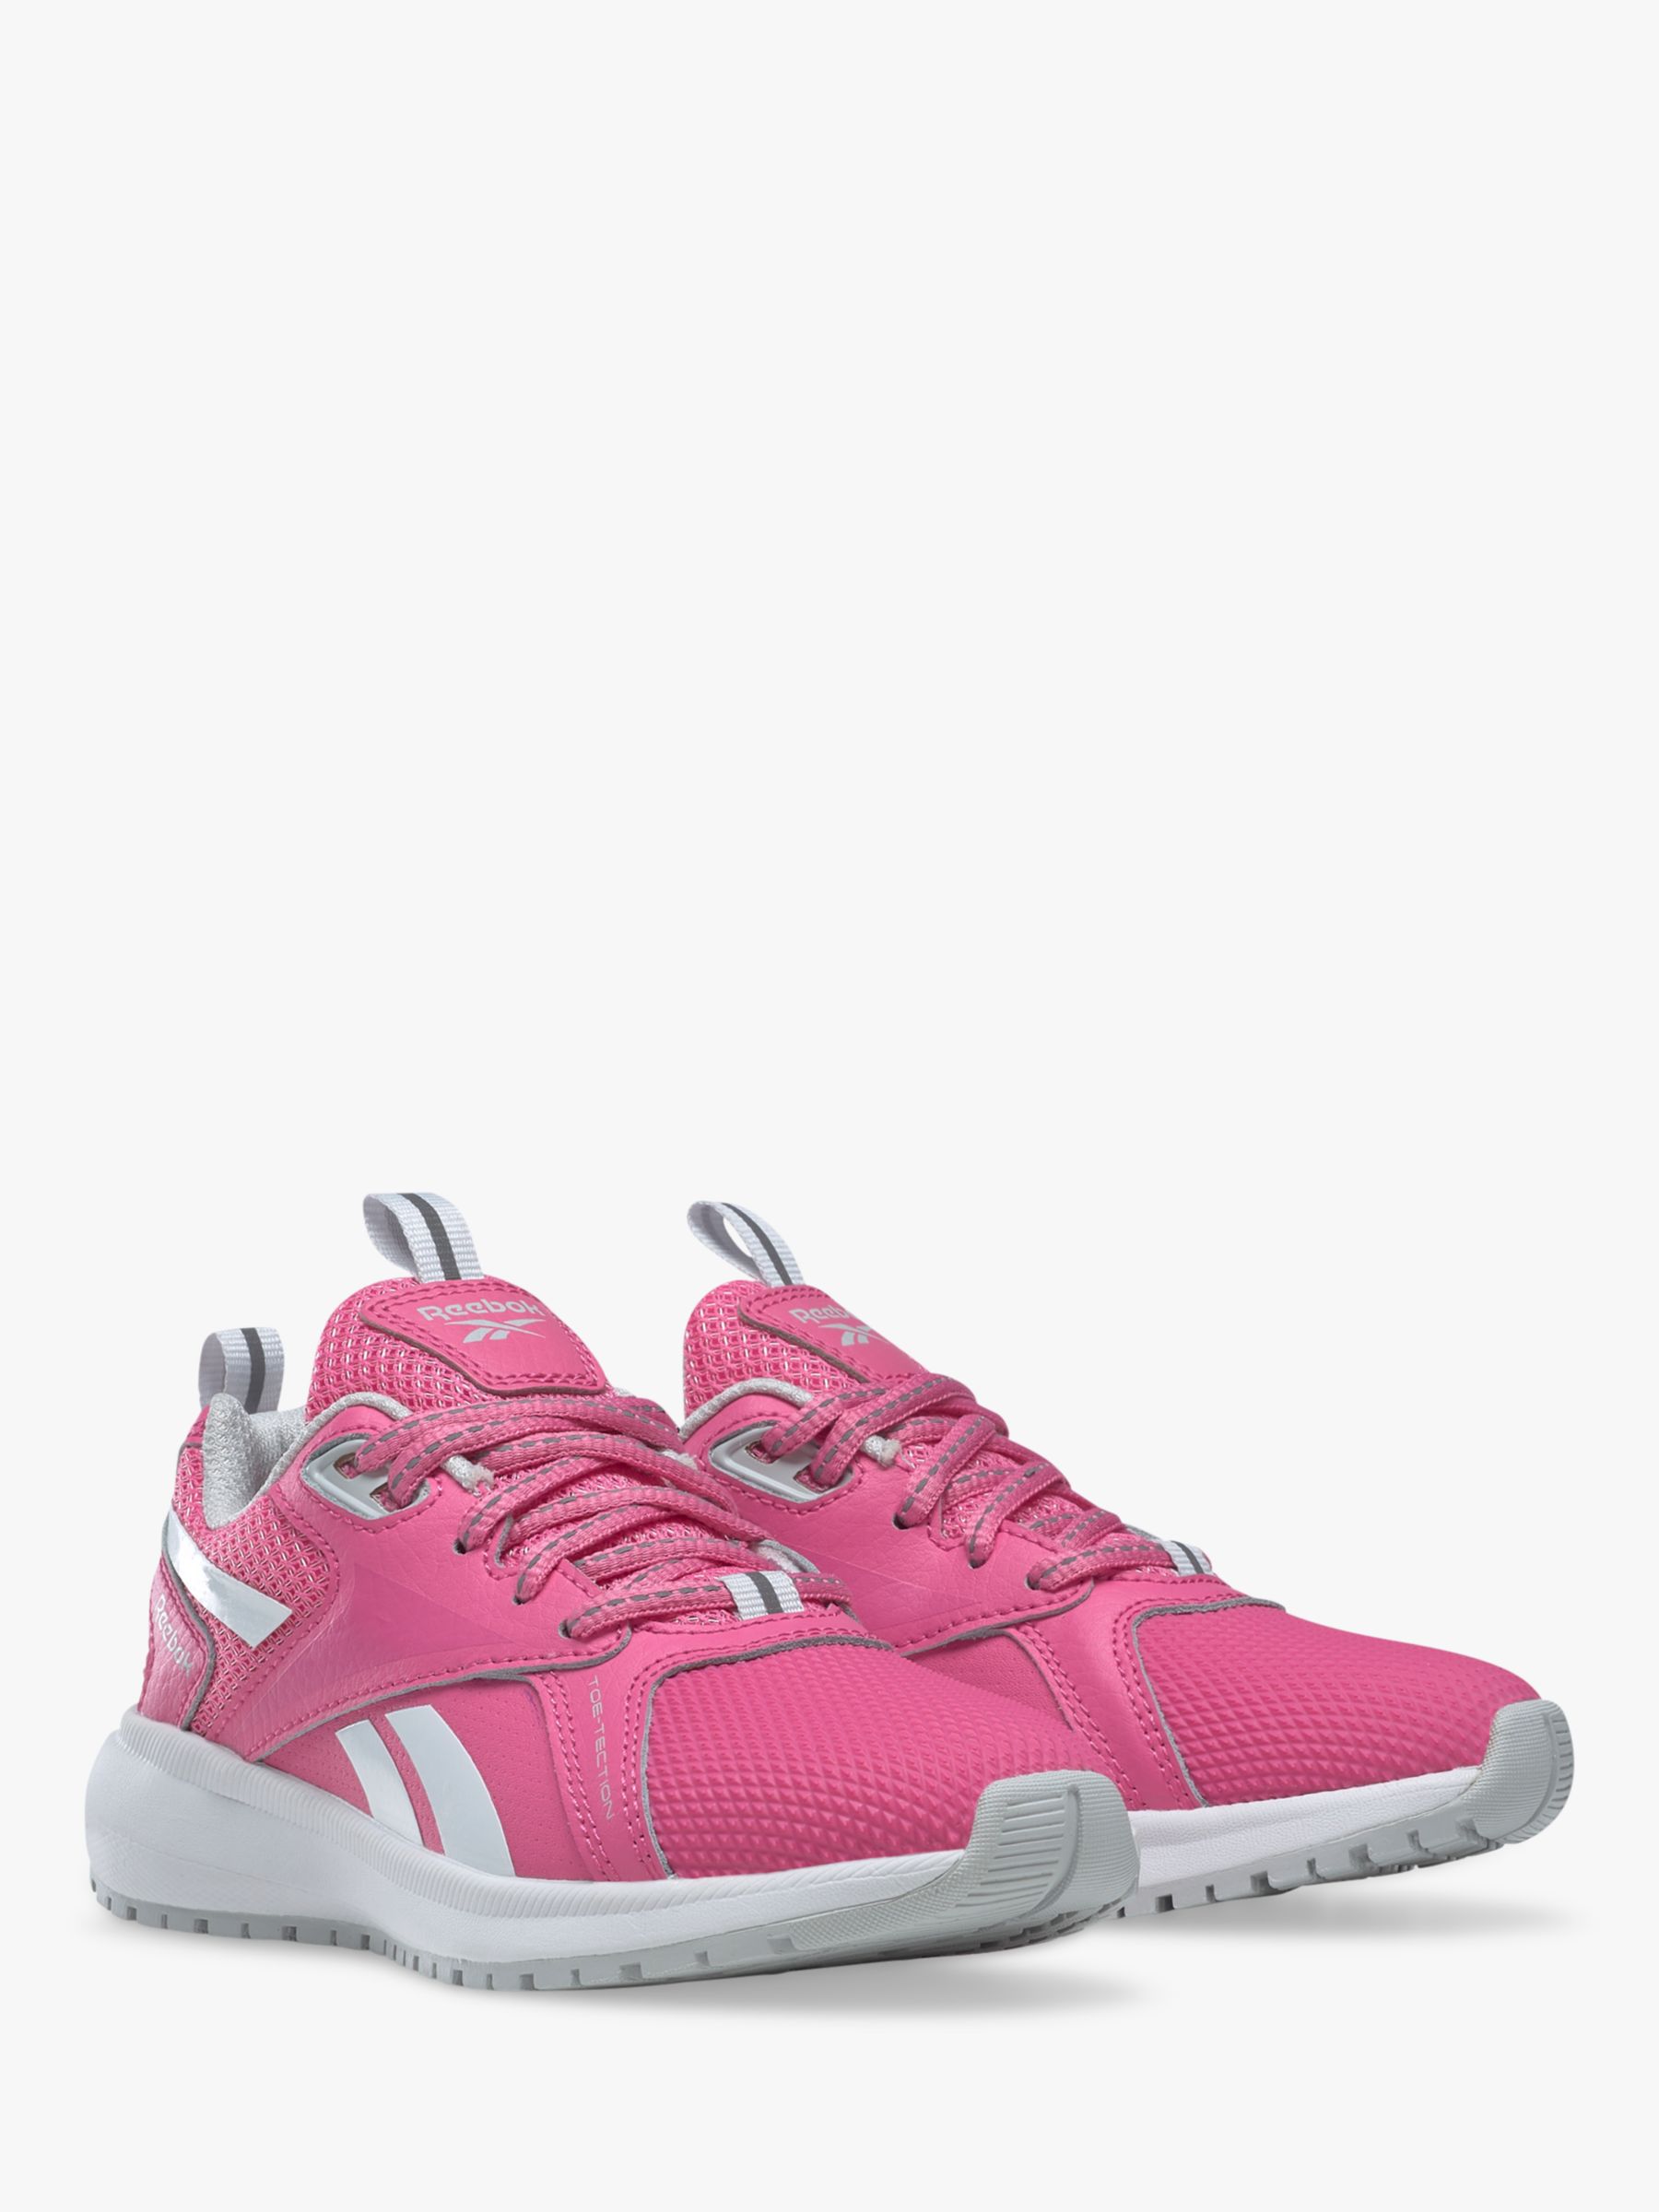 2/Ftwr Partners Reebok at XT True Lewis Durable Trainers, & White Kids\' John Grey Pink/Pure